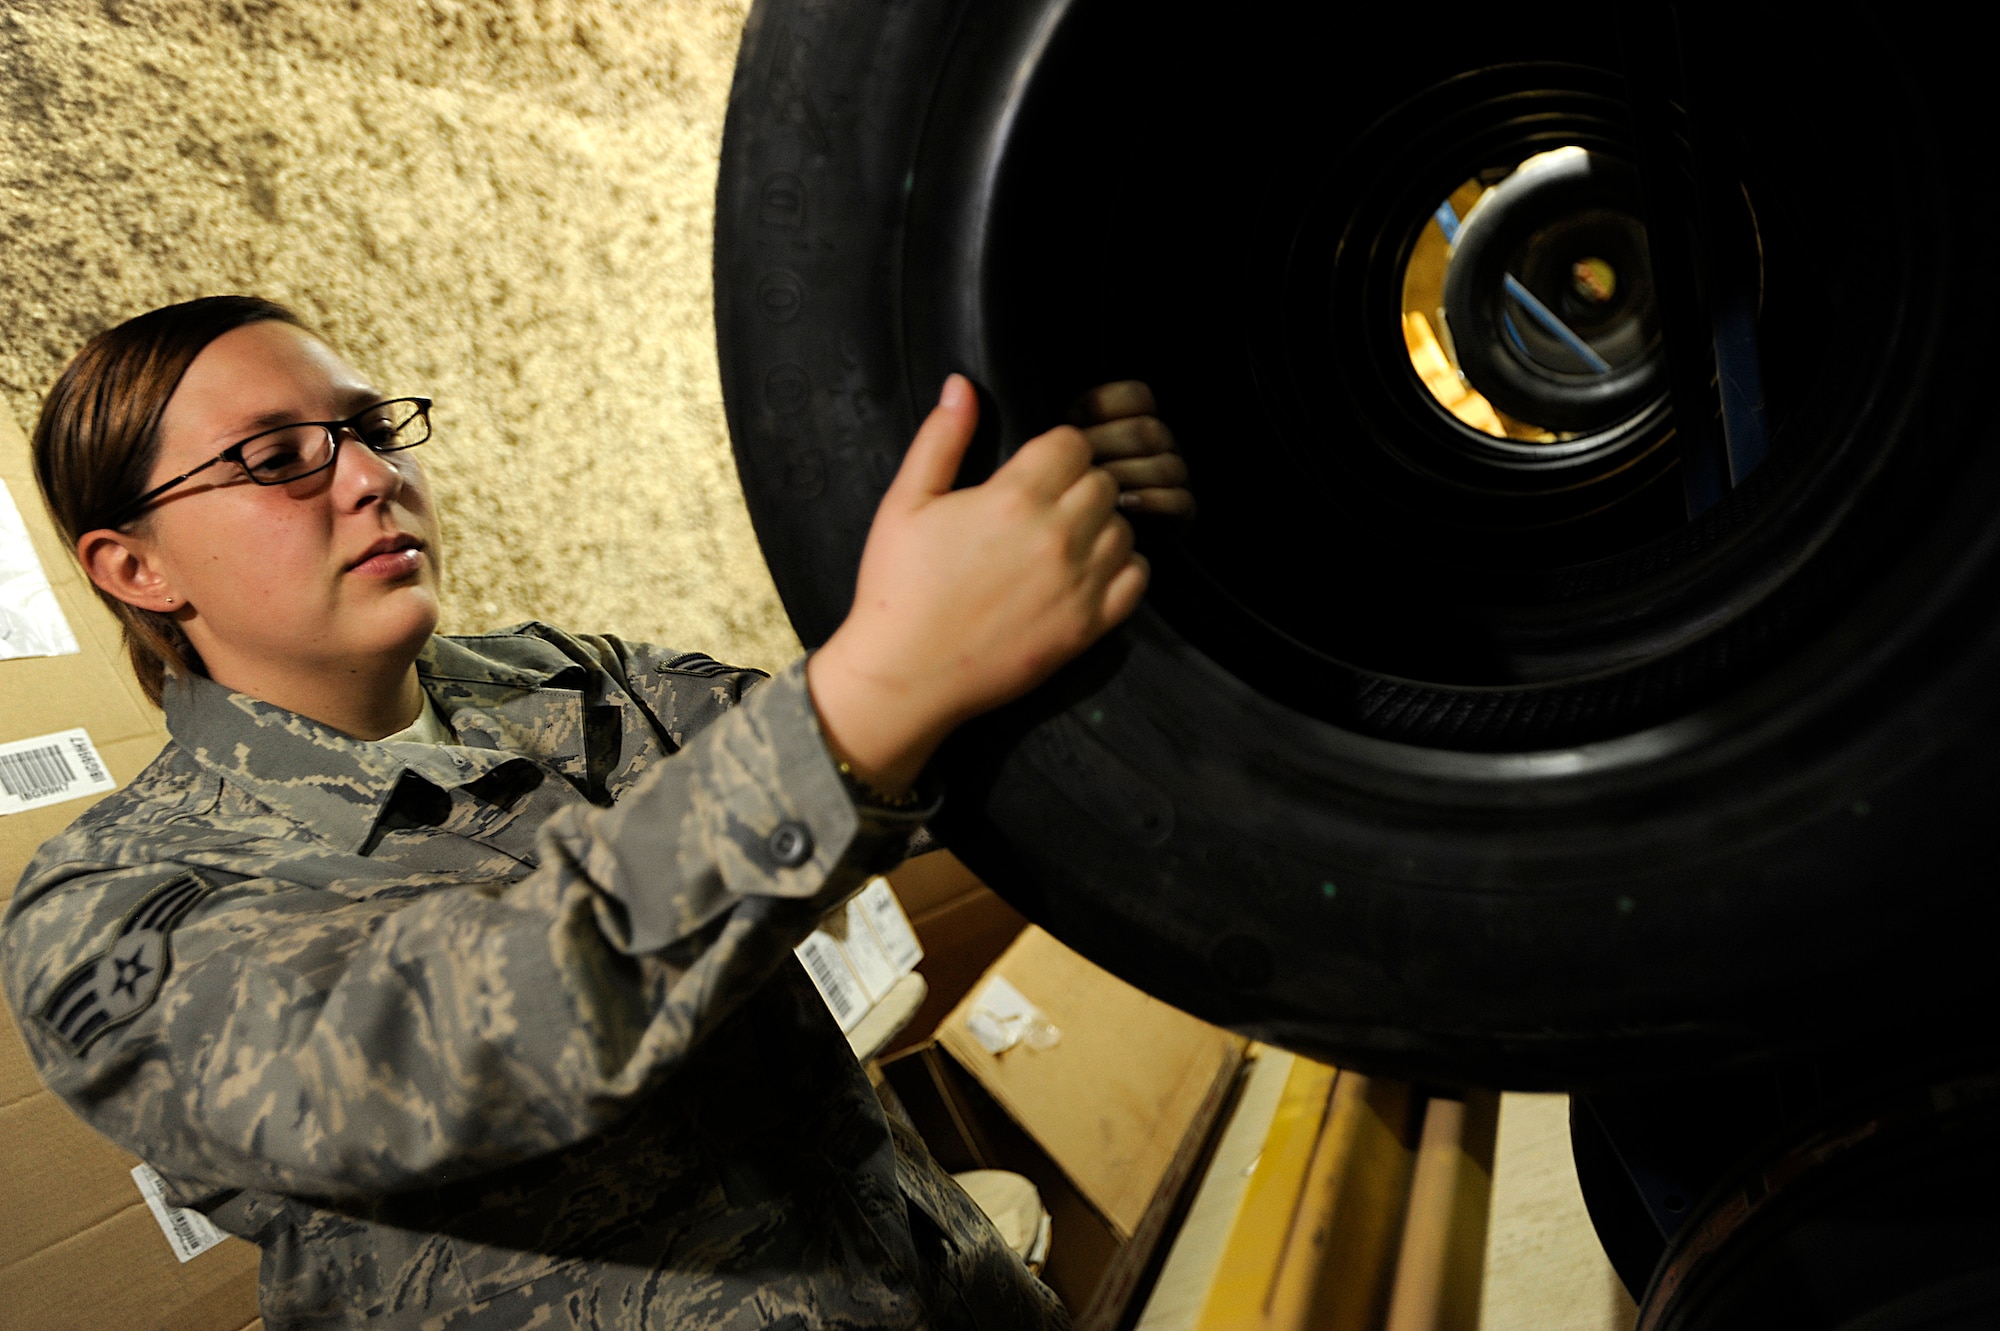 Senior Airman Heather Libiszewski retrieves an F-16 Fighting Falcon tire Oct. 10 at Joint Base Balad, Iraq. She recently helped put out a fire in the Aircraft Supply Store here, saving millions of dollars in Air Force assets. Libiszewski, a supply technician assigned to the 332nd Expeditionary Logistics Readiness Squadron, is deployed from Westover Air Reserve Base, Mass., and her hometown is Warren, Mass. (U.S. Air Force photo/Airman 1st Class Jason Epley)